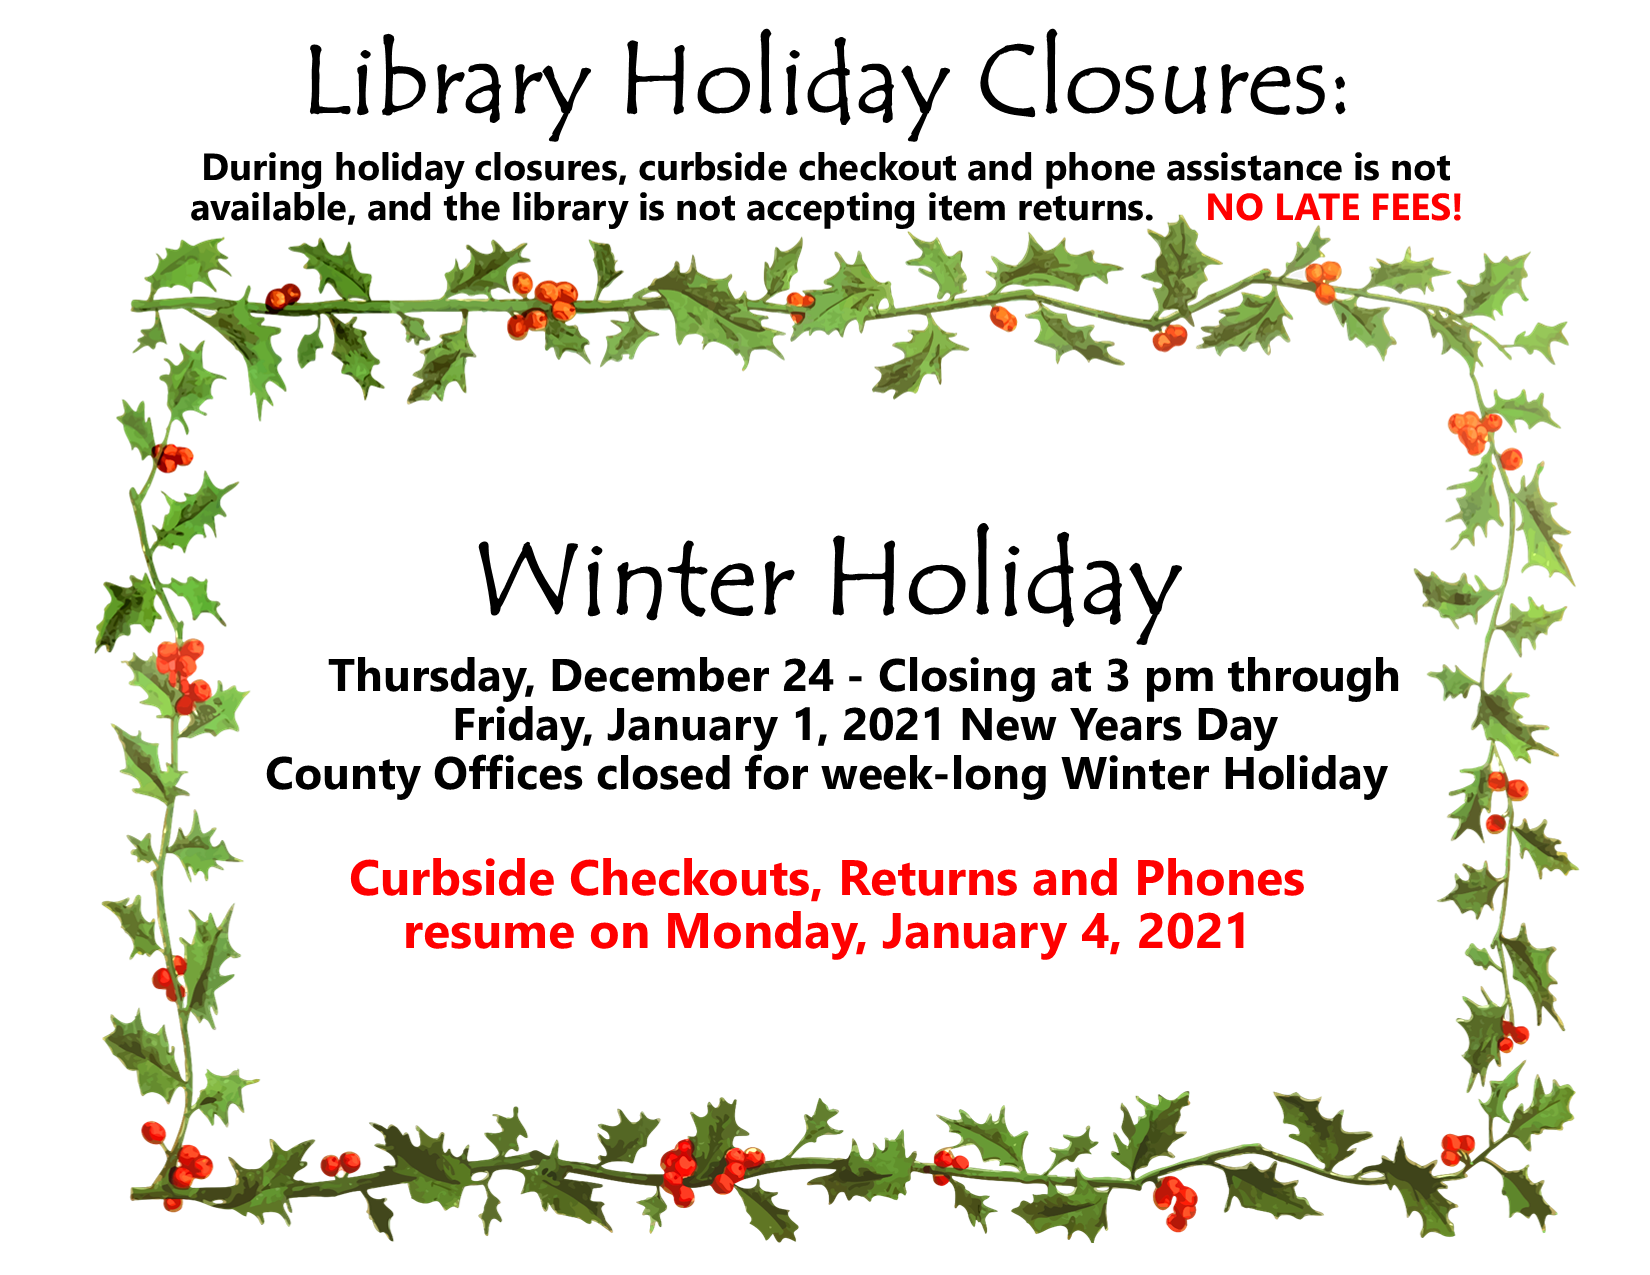 Winter Holiday Fort Bragg Library